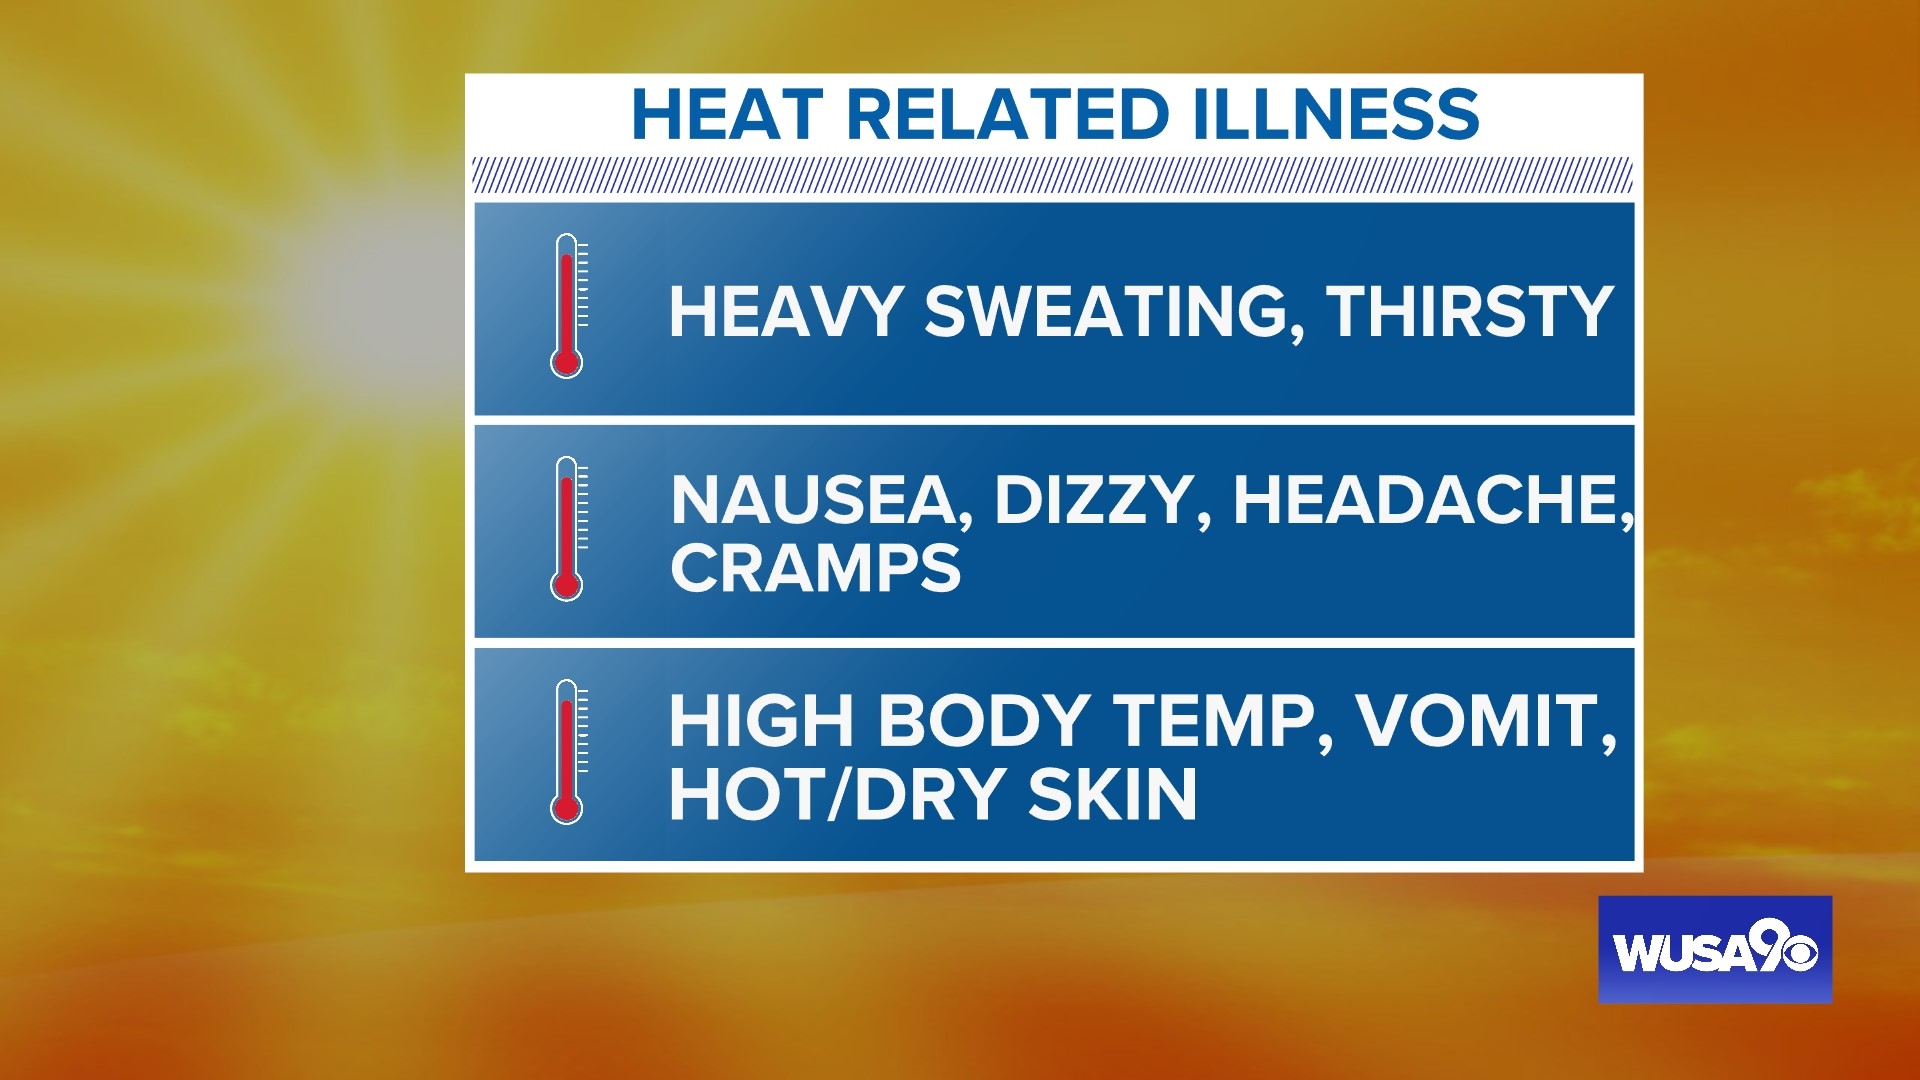 Here are some ways to protect yourself in extreme heat.